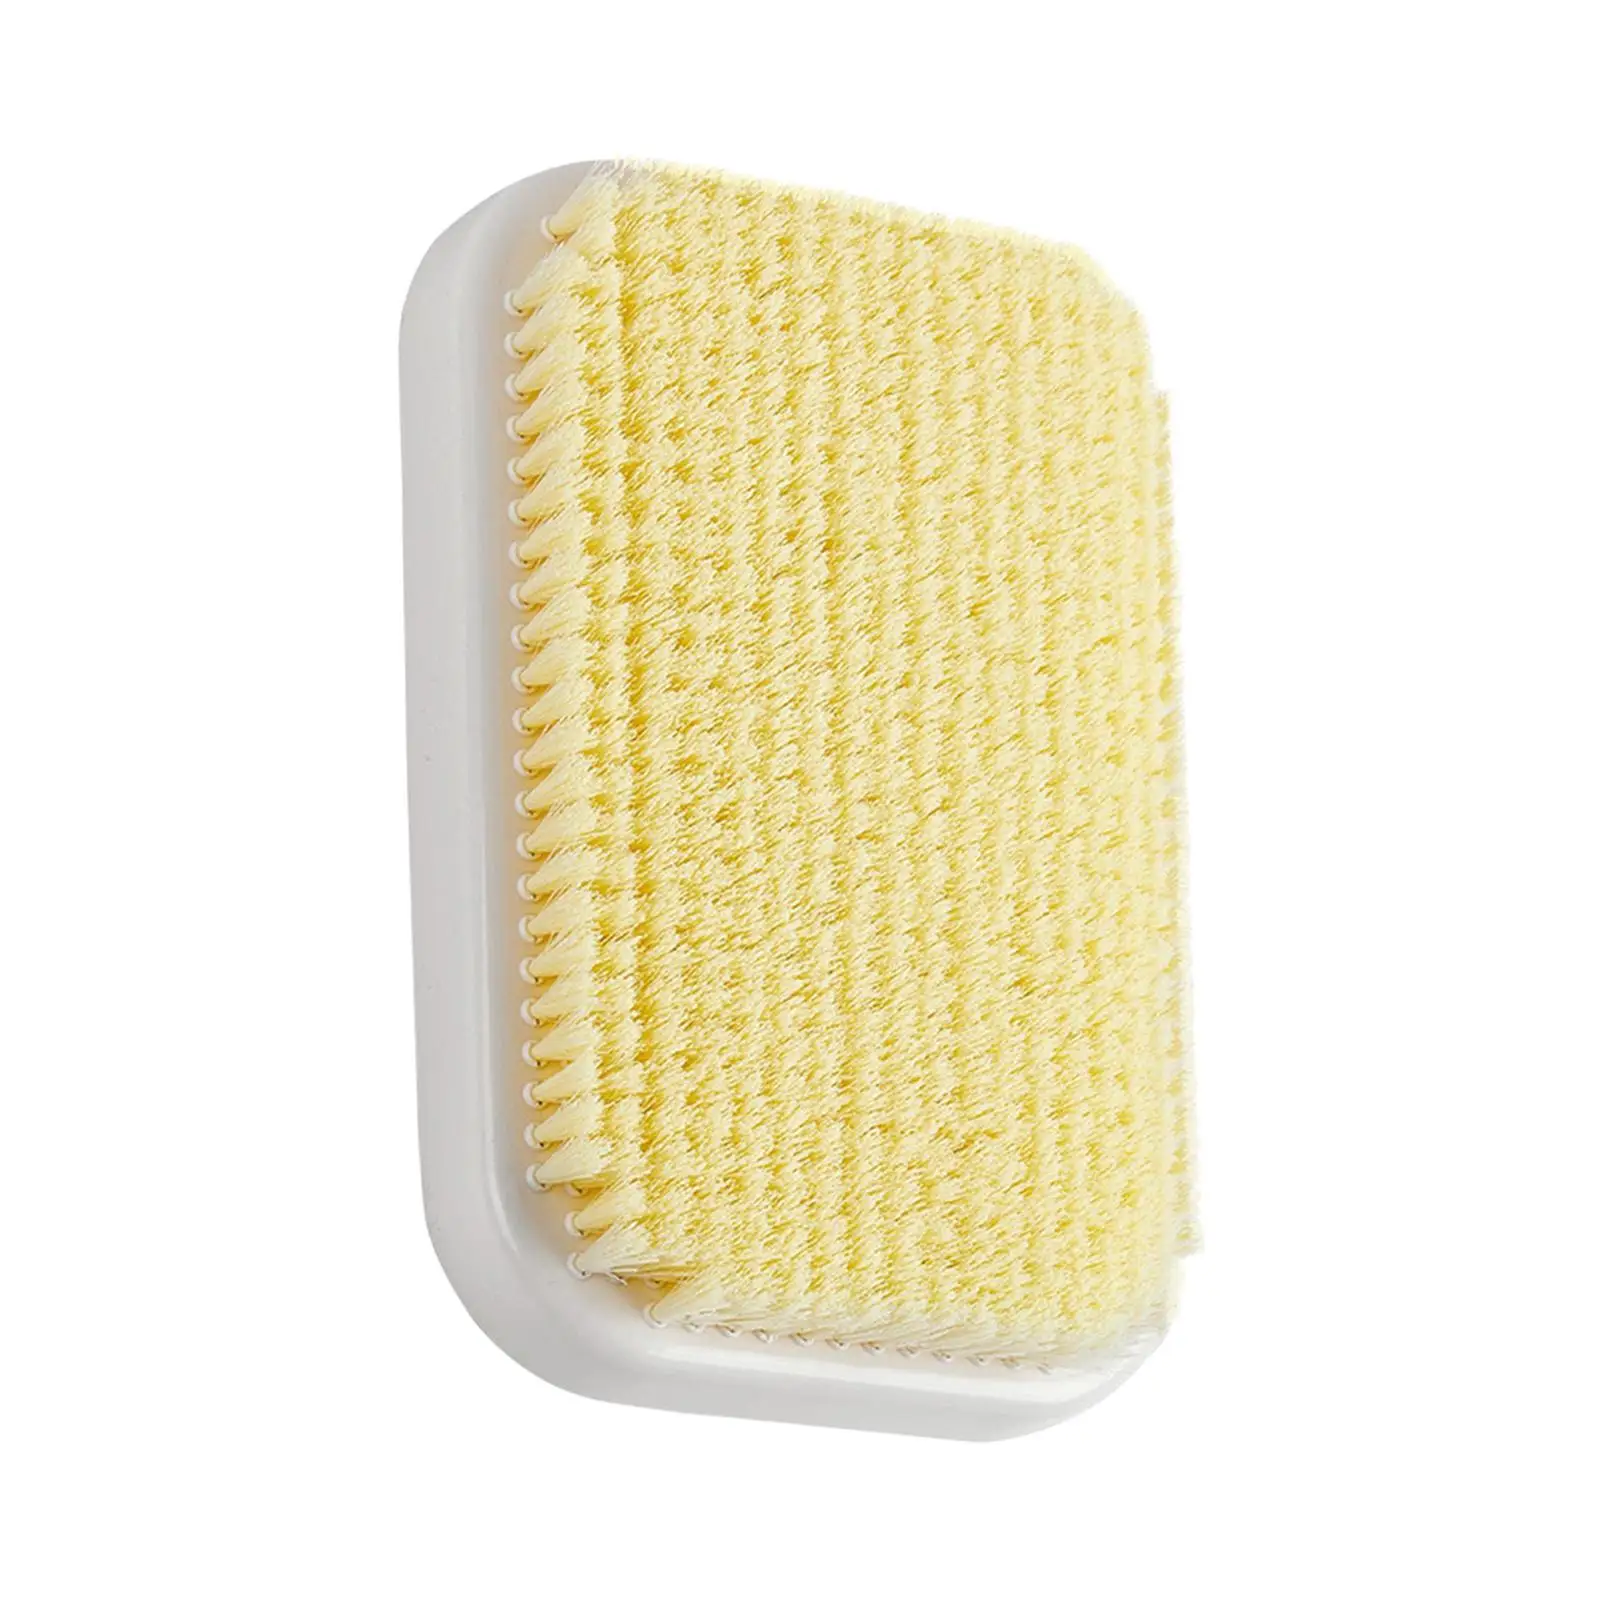 Back Brush Wall Mount Portable Yellow Soft Fittings Cleaning Tool for Travel